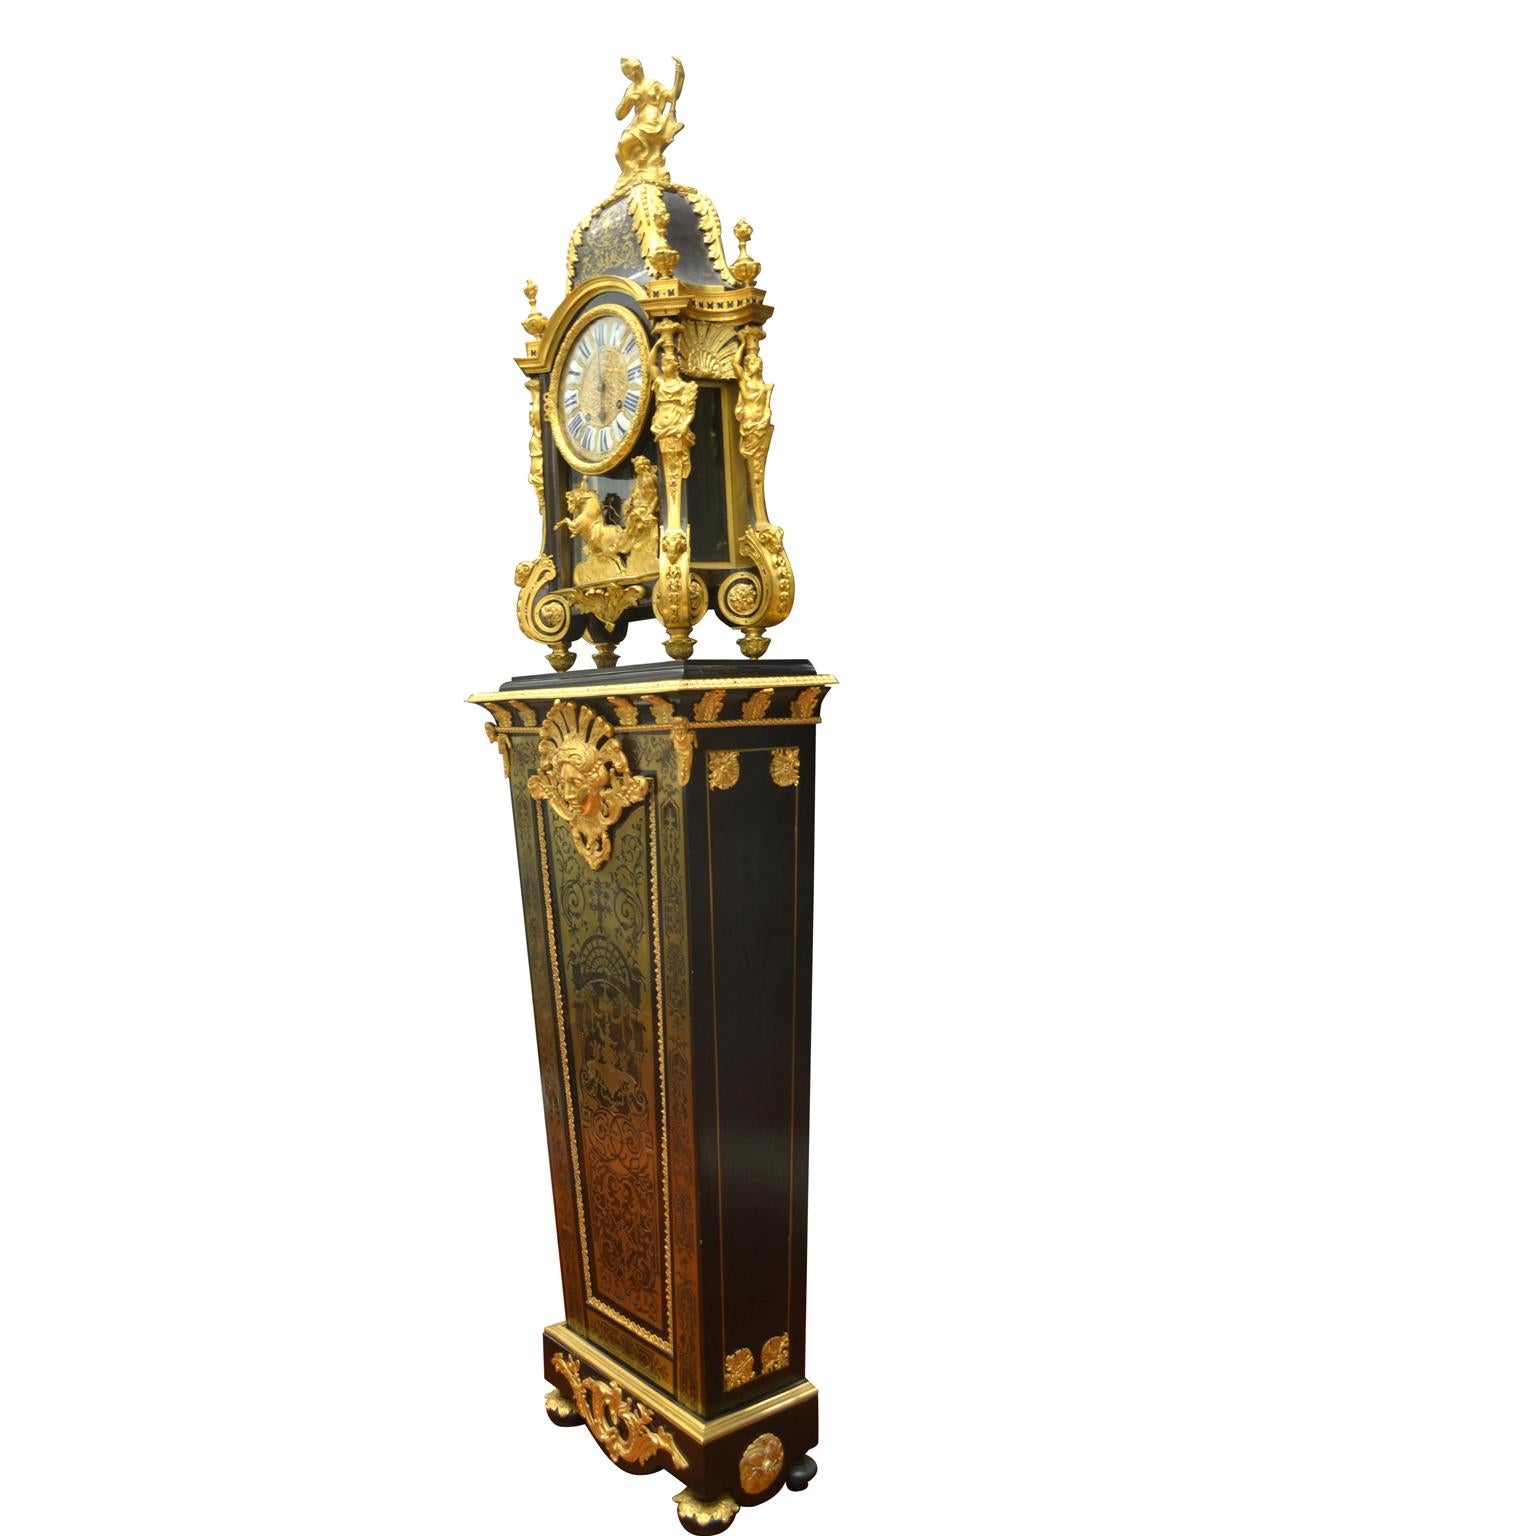 An exceptional 18 century Louis XIV Boulle clock and pedestal the movement signed Duval Paris for Gideon Duval., The circular dial with twelve individual enameled plaques with Roman numerals indicating the hours and Arabic numerals for the minutes